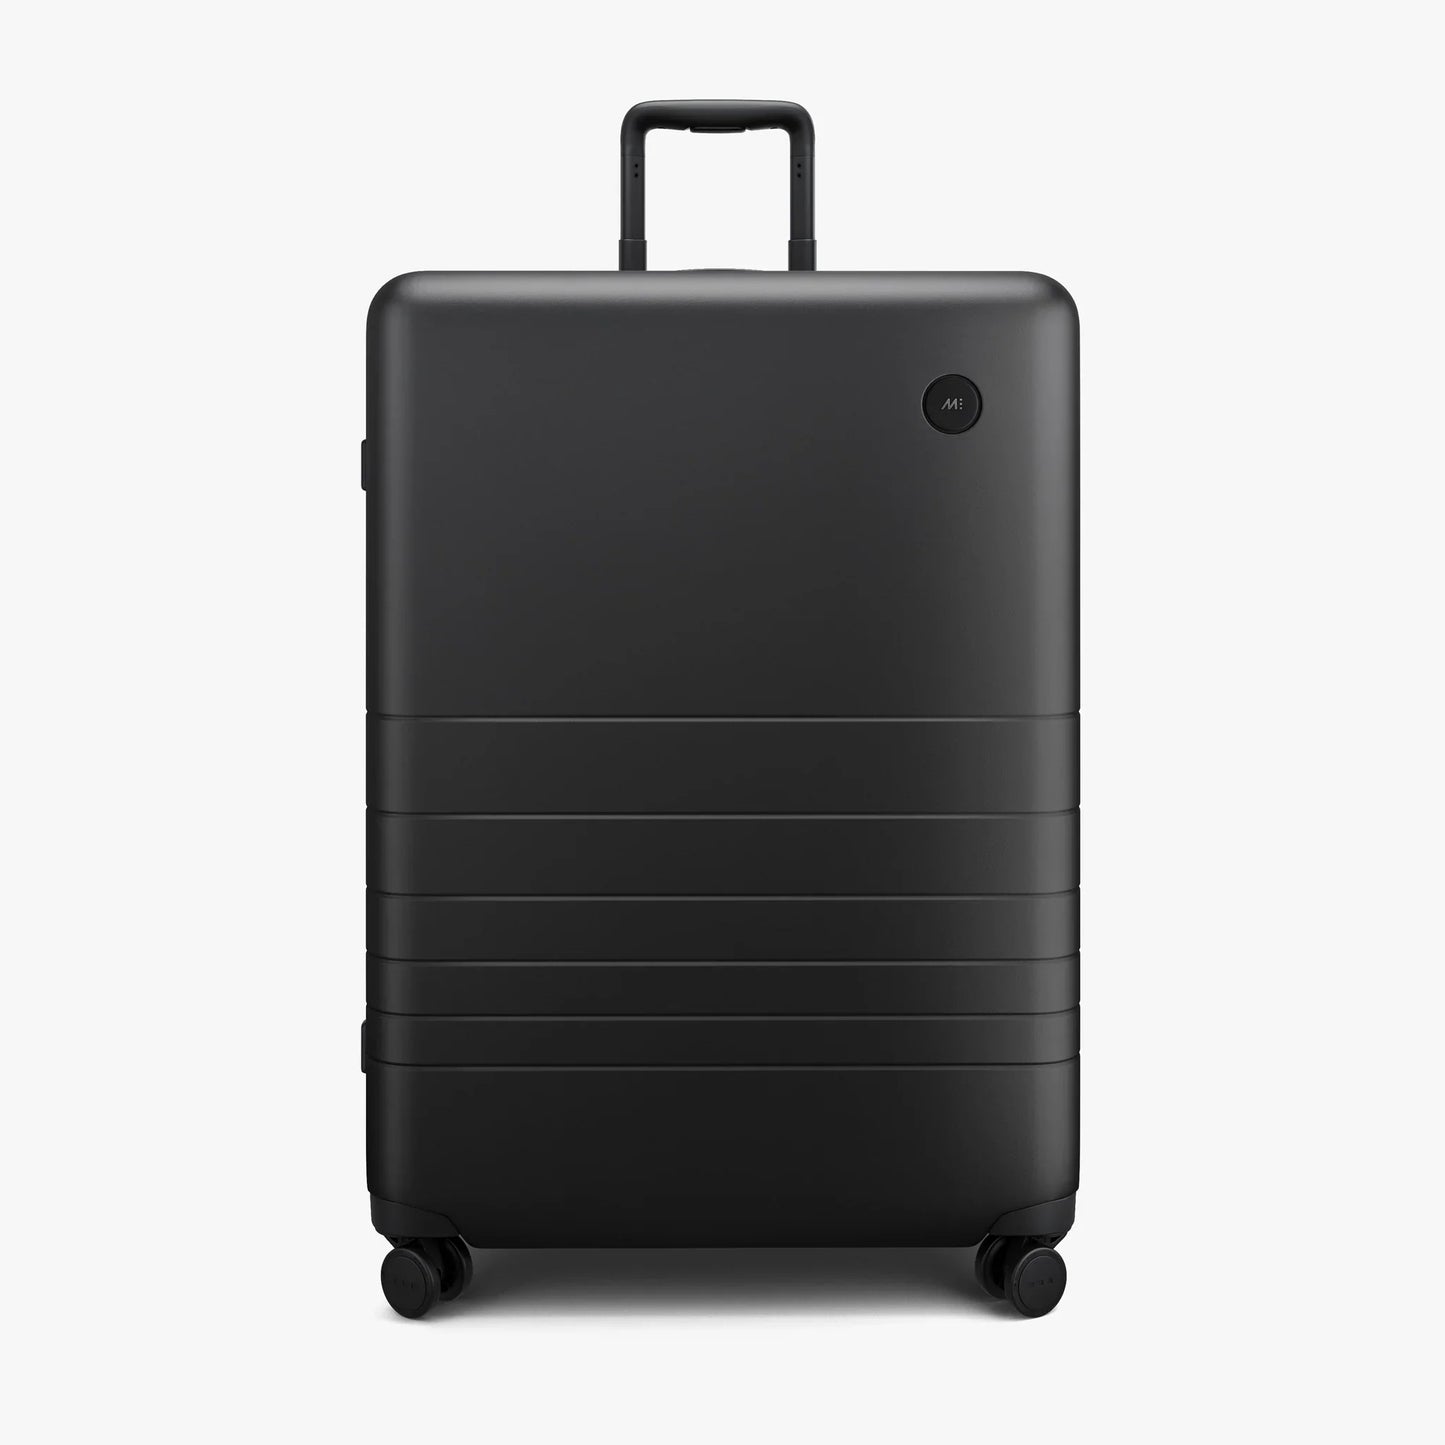 Monos Check-In Large Luggage - Midnight Black